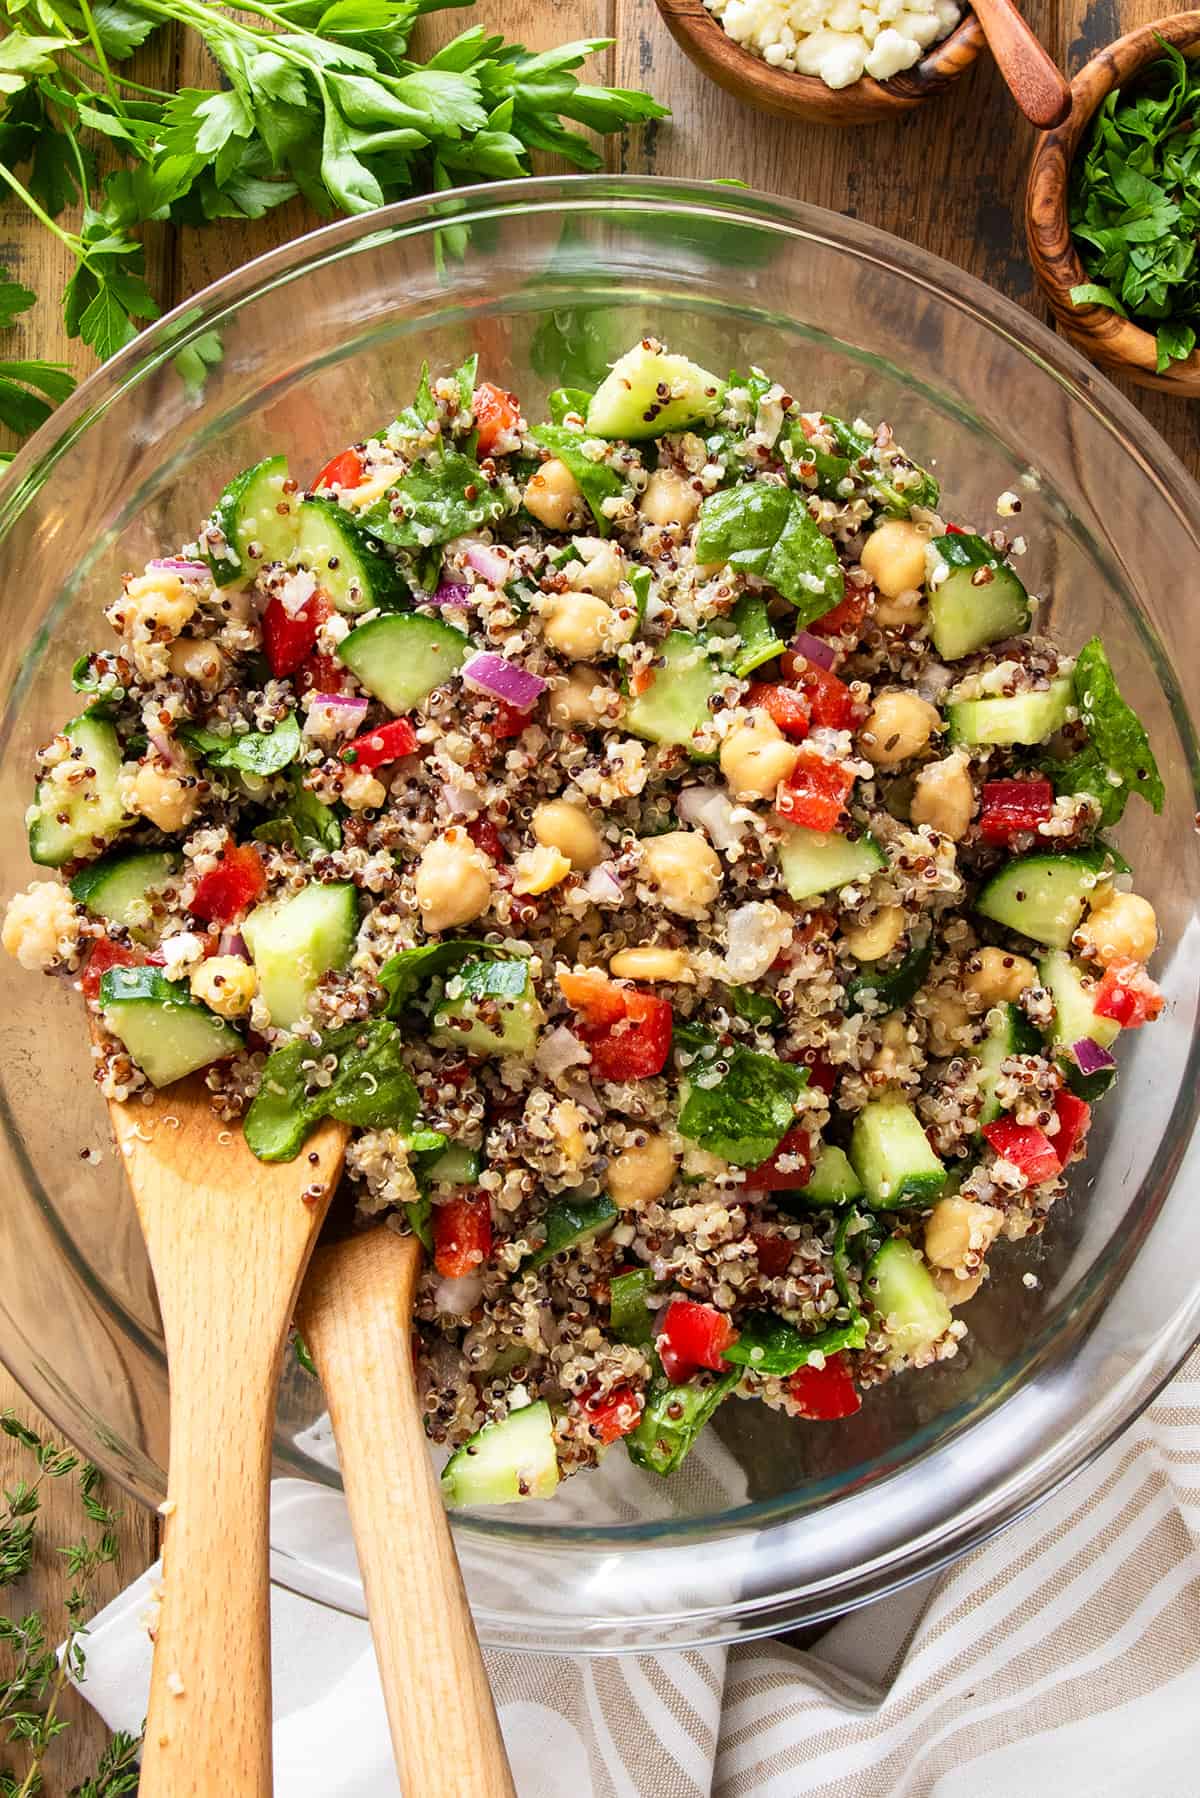 Overhead of quinoa and chickpea salad with vinaigrette dressing and Mediterranean vegetables tossed in.